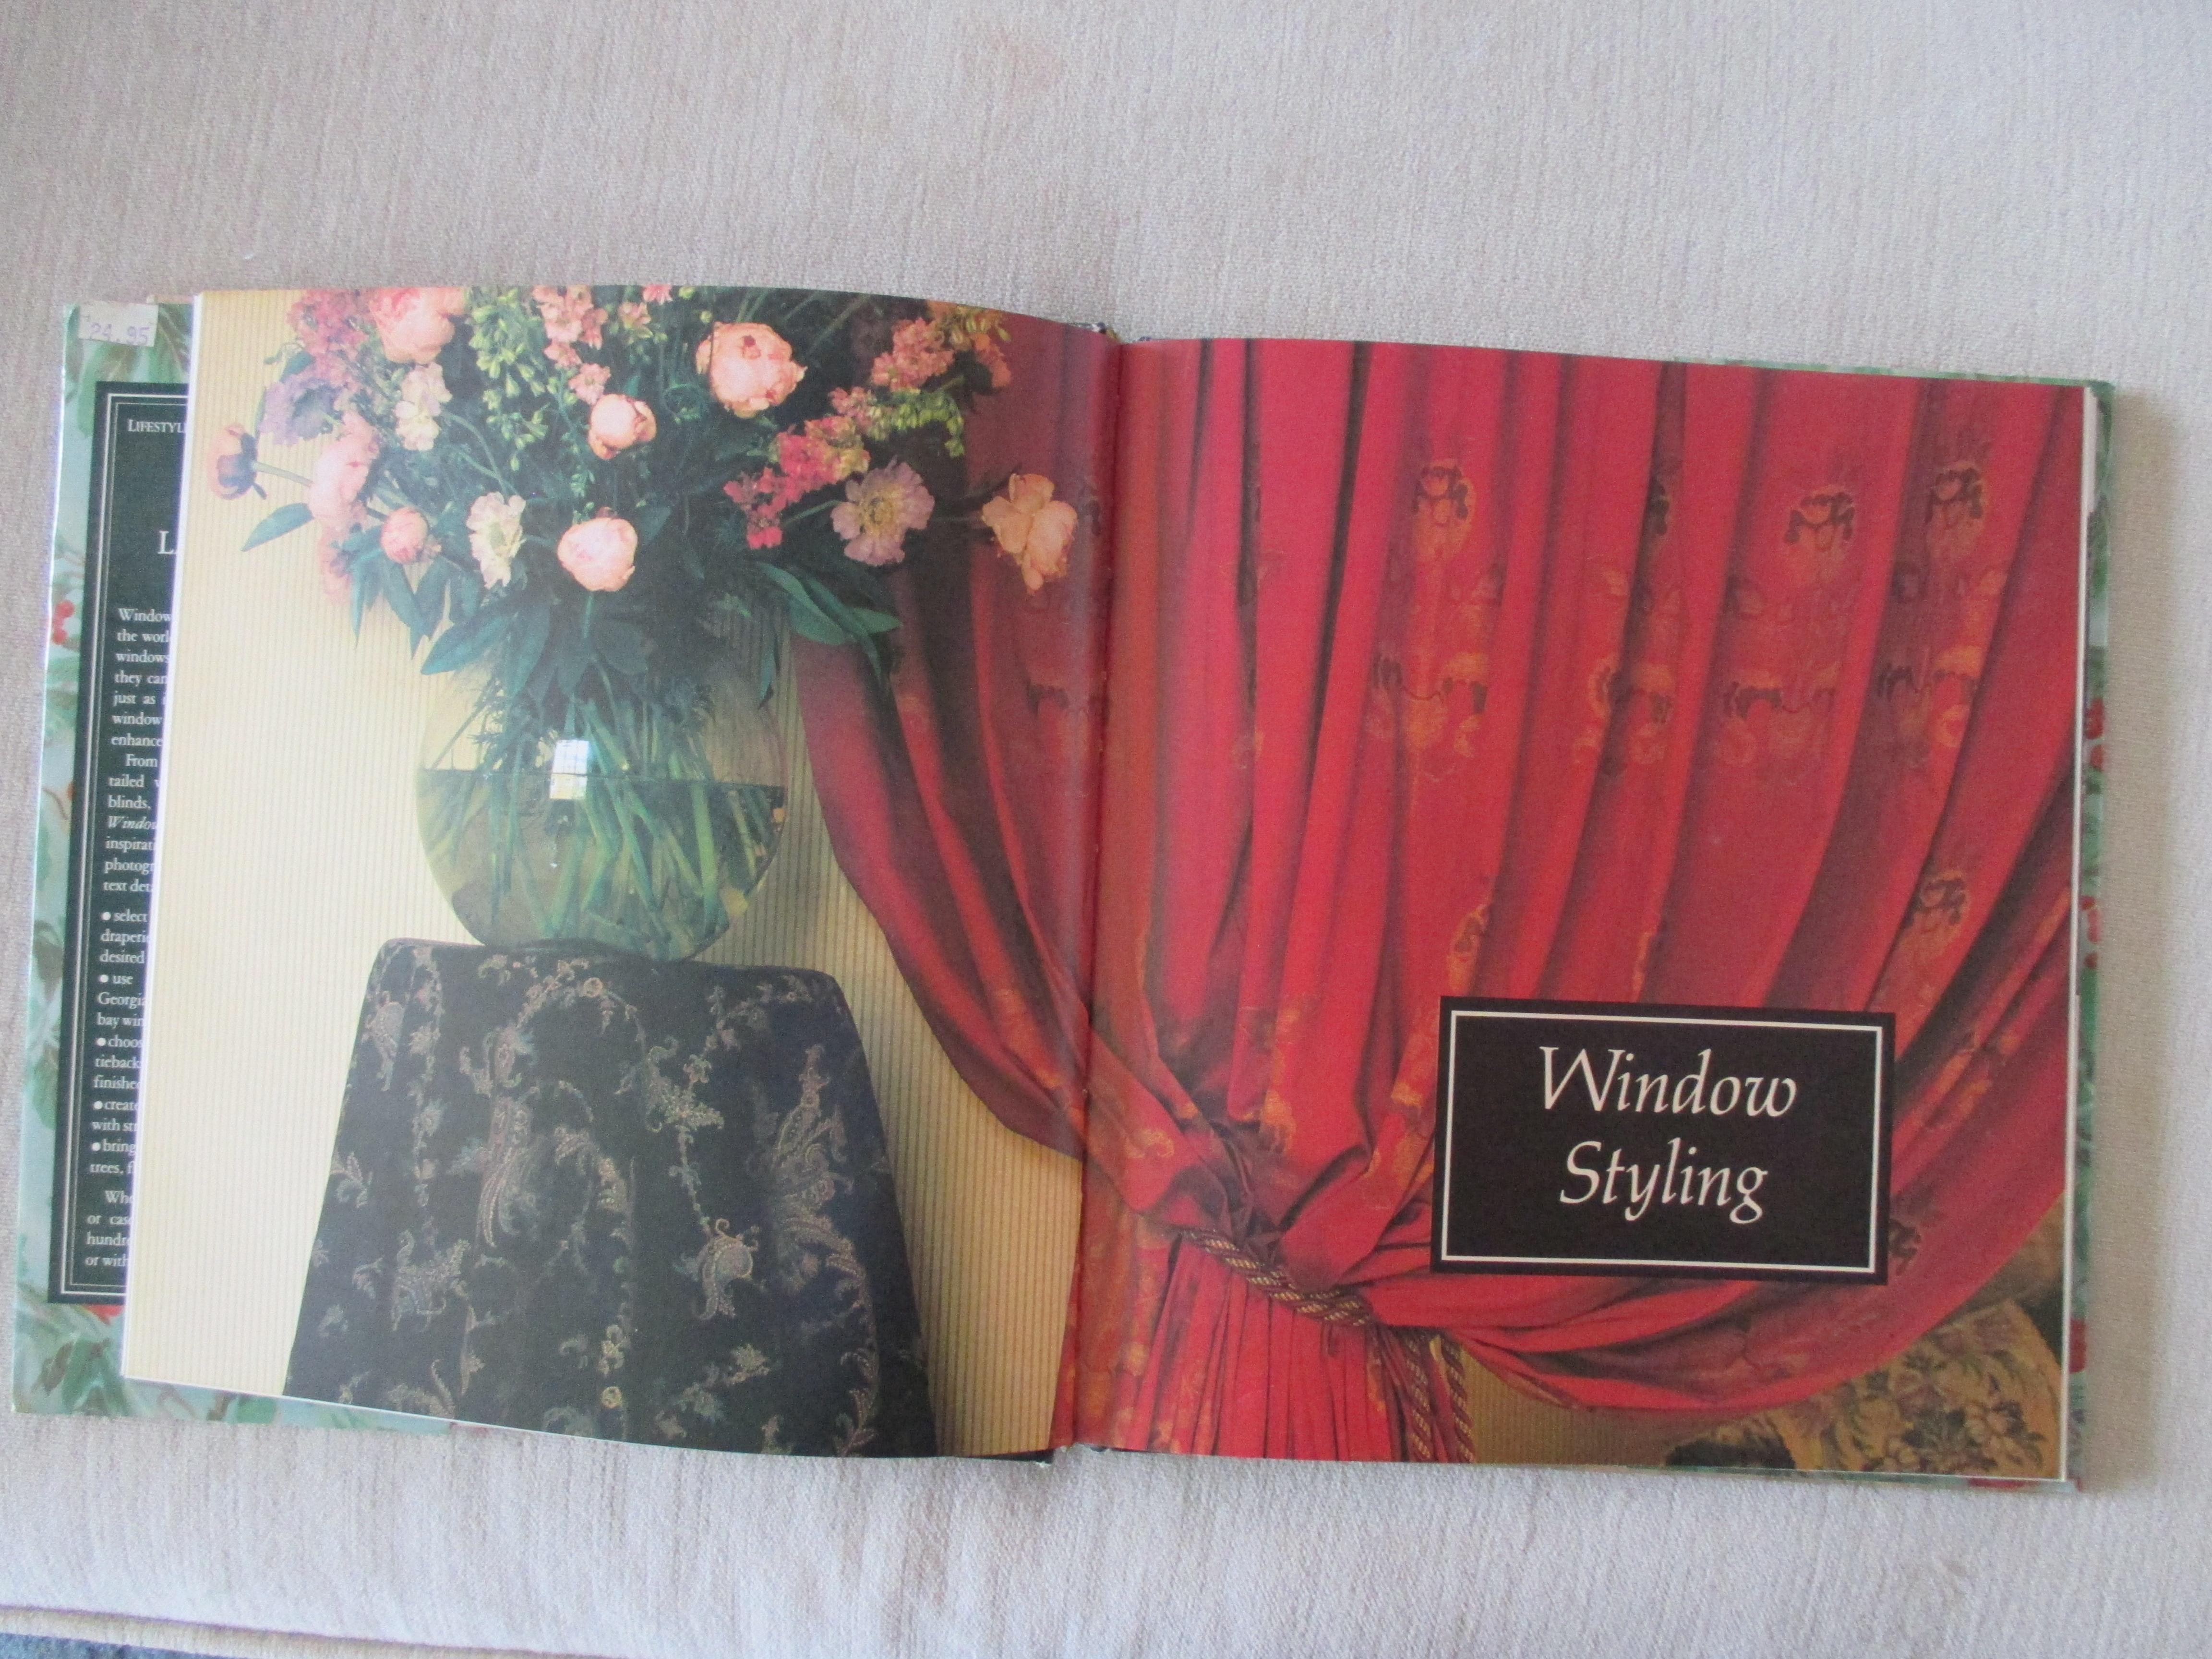 Laura Ashley windows hardcover book
Provides ideas and advice for home window decoration in the Laura Ashley style, including an overview of window shapes and sizes, tips on lighting, measuring and choosing curtain materials, and many